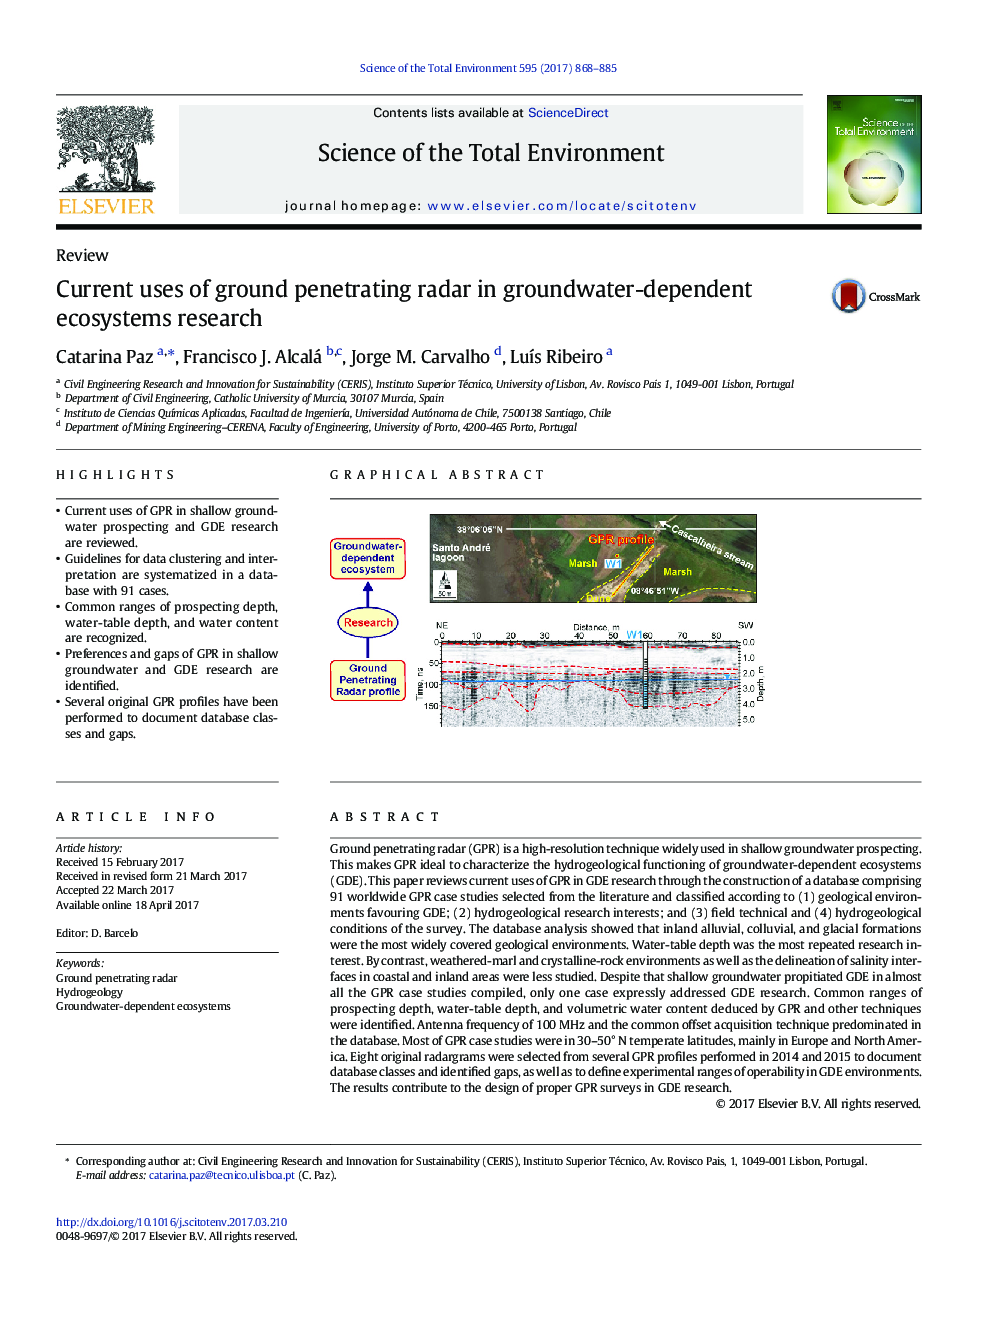 ReviewCurrent uses of ground penetrating radar in groundwater-dependent ecosystems research